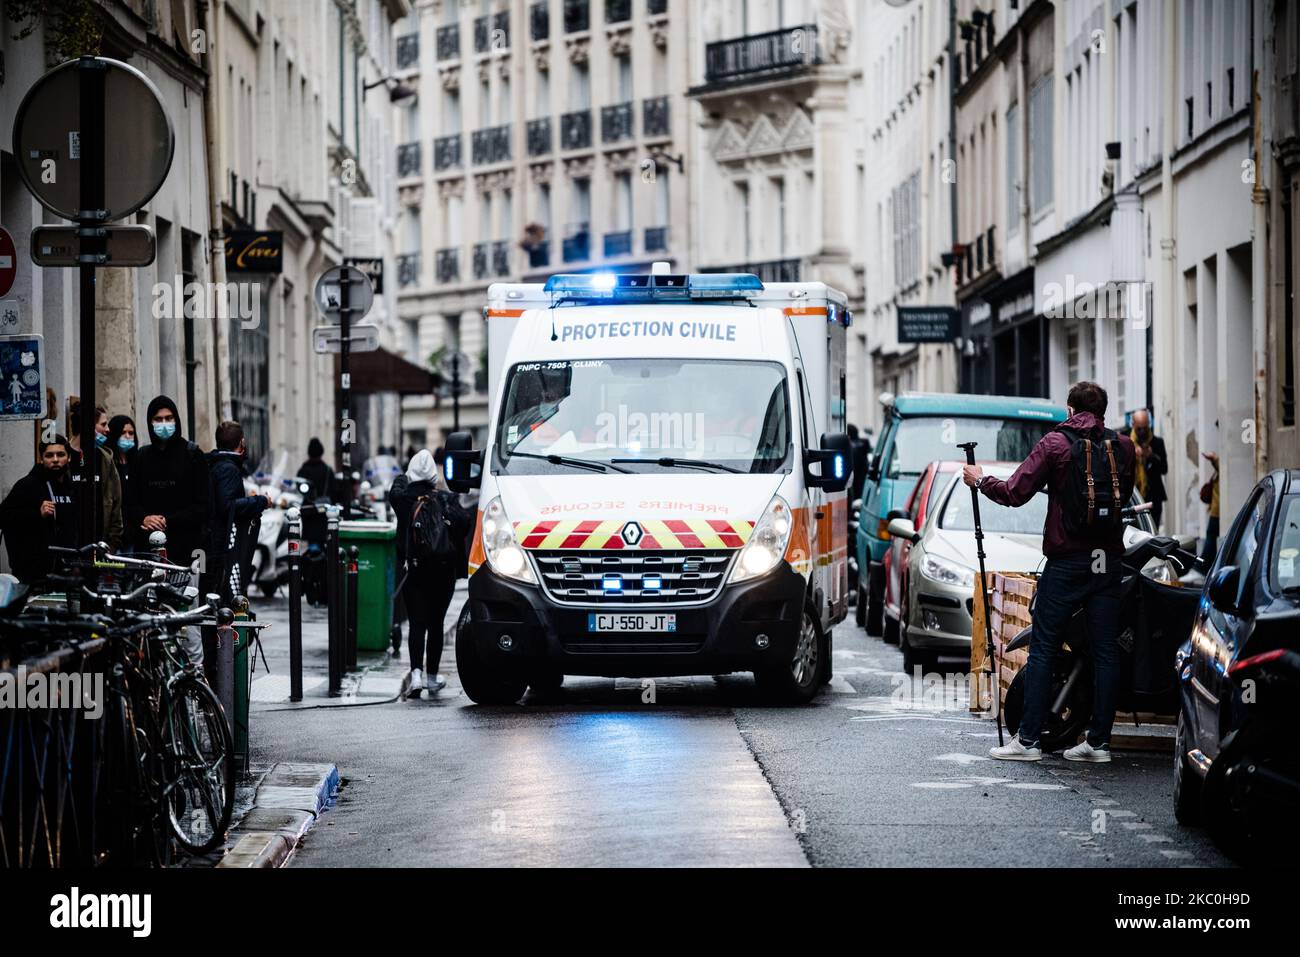 This Friday, September 25, 2020, shortly before noon, a man armed with a knife or a machete attacked people in the rue Nicolas Appart in the 11th arrondissement of Paris, where the former premises of the newspaper Charlie Hebdo are located and where the attacks of January 7, 2015 against the editorial staff took place, causing 2 injuries. The perpetrator of the attack was arrested along with a second man, and a security perimeter was immediately established in the nearby streets. The investigation was referred to the National Anti-Terrorist Prosecutor's Office. (Photo by Samuel Boivin/NurPhoto Stock Photo